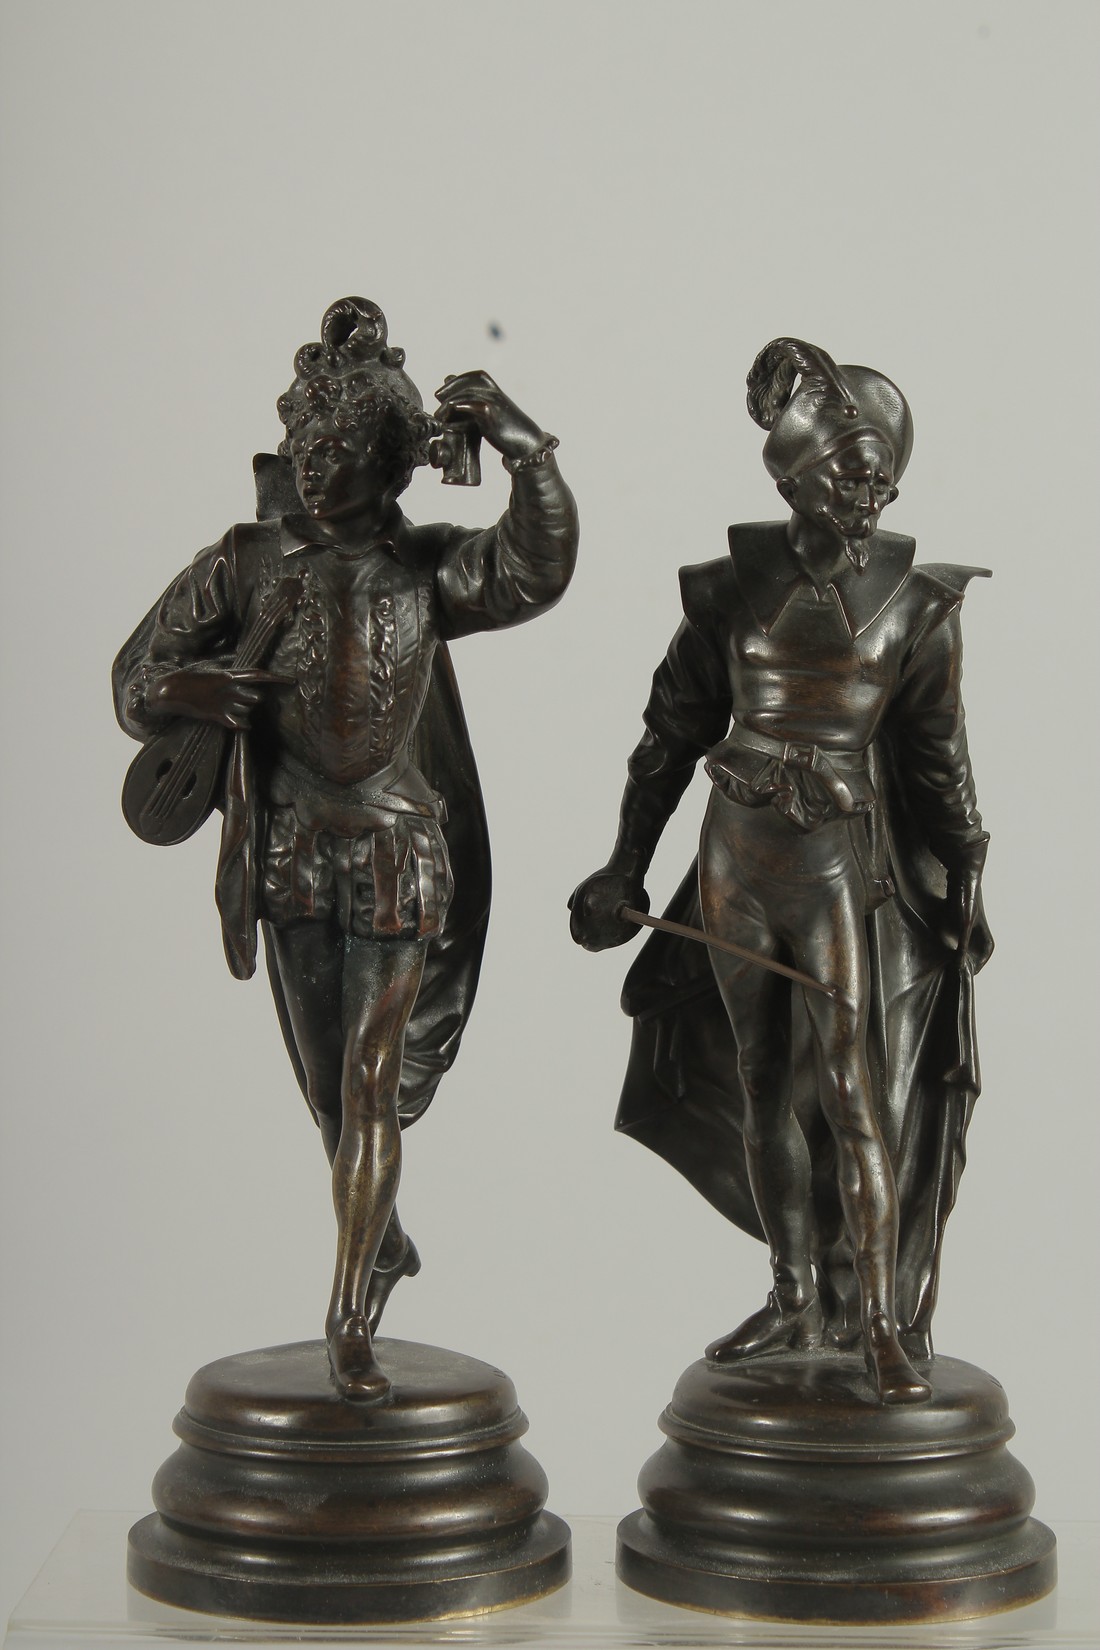 AUGUSTE LOUIS LALOUETTE (1826 - 1883) FRENCH. A PAIR OF BRONZE CAVILER FIGURES on circular bases 8.